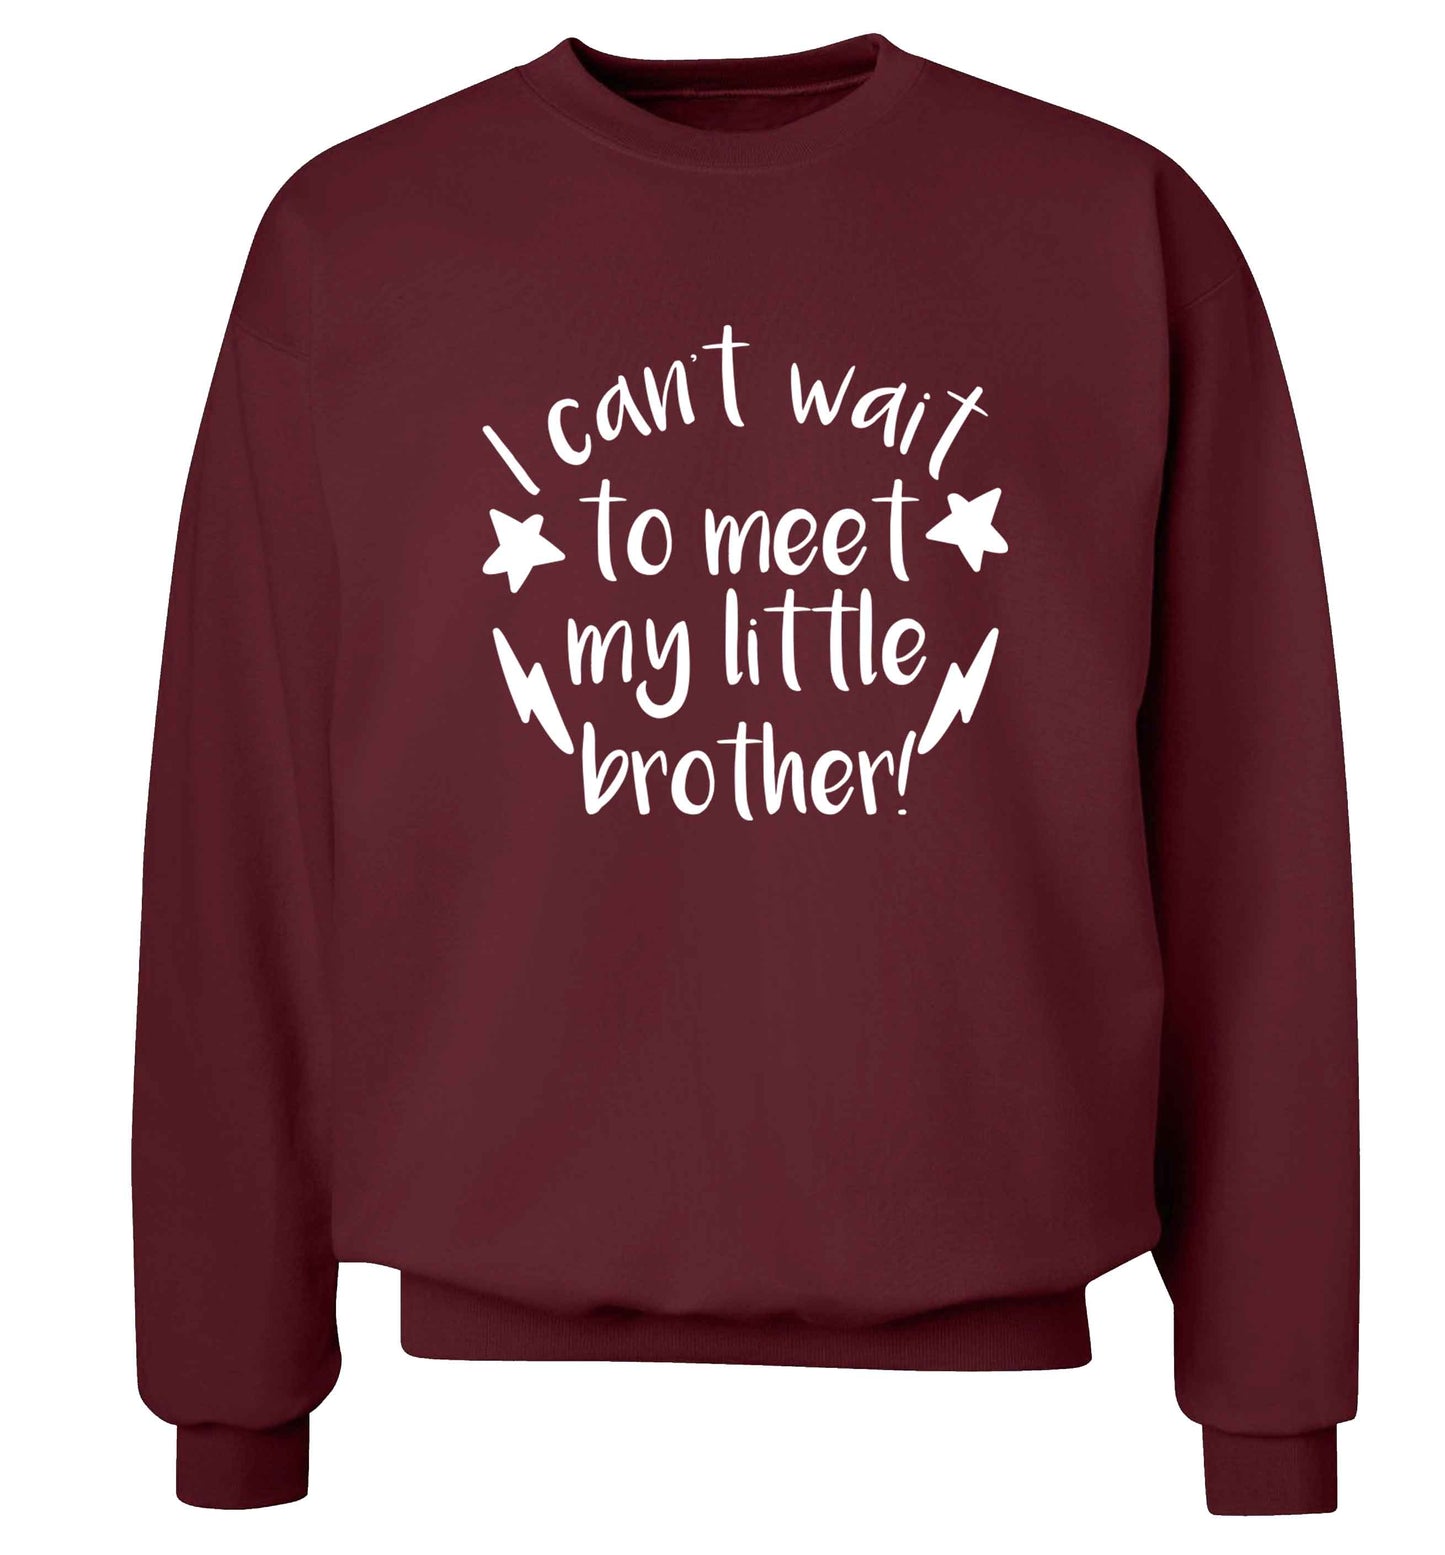 I can't wait to meet my sister! Adult's unisex maroon Sweater 2XL